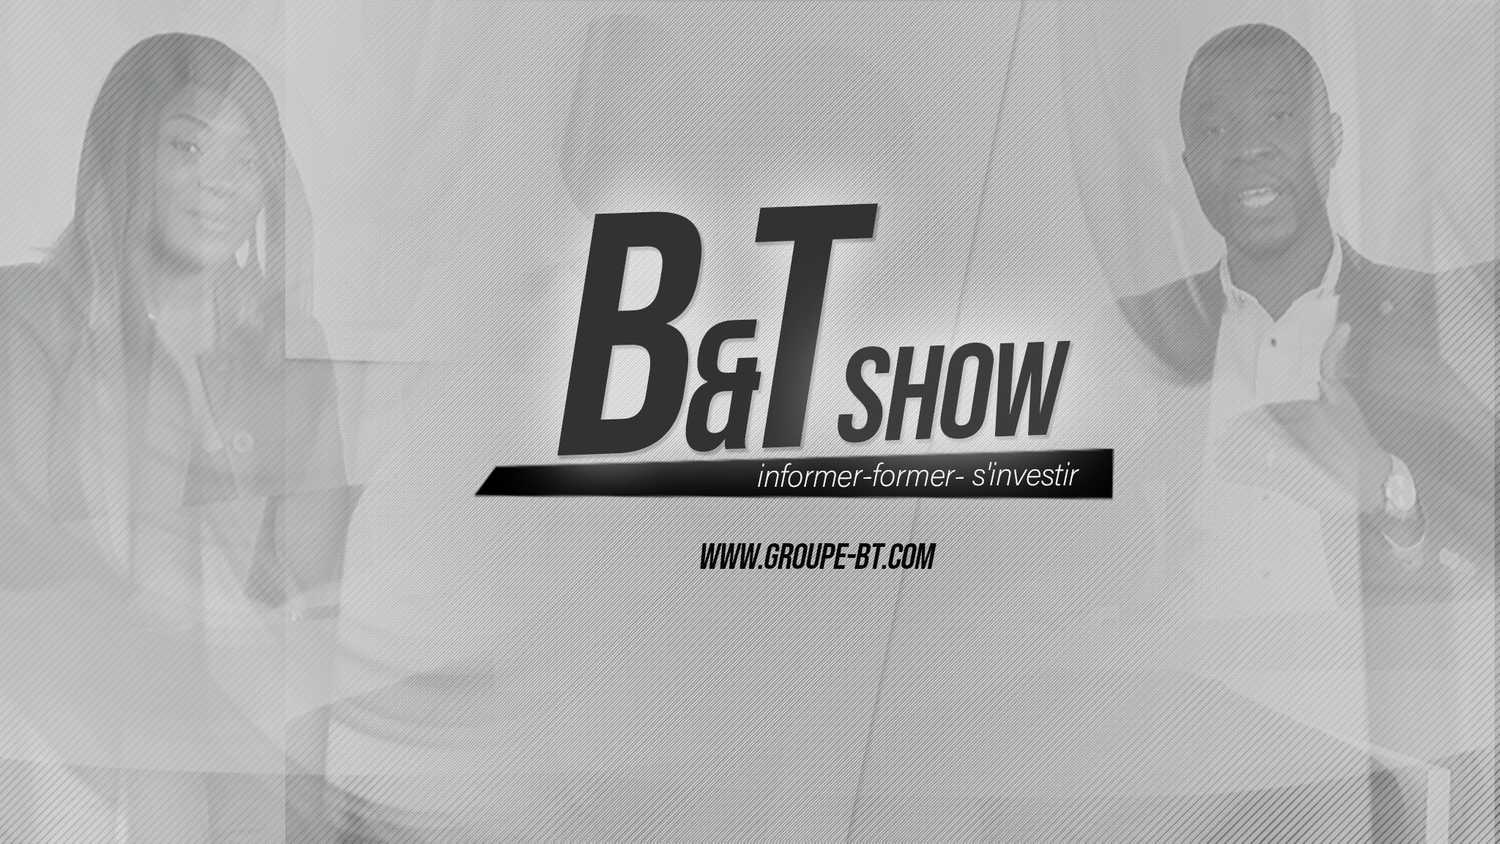 B&T Show is an information and exchange program on socio-economic news